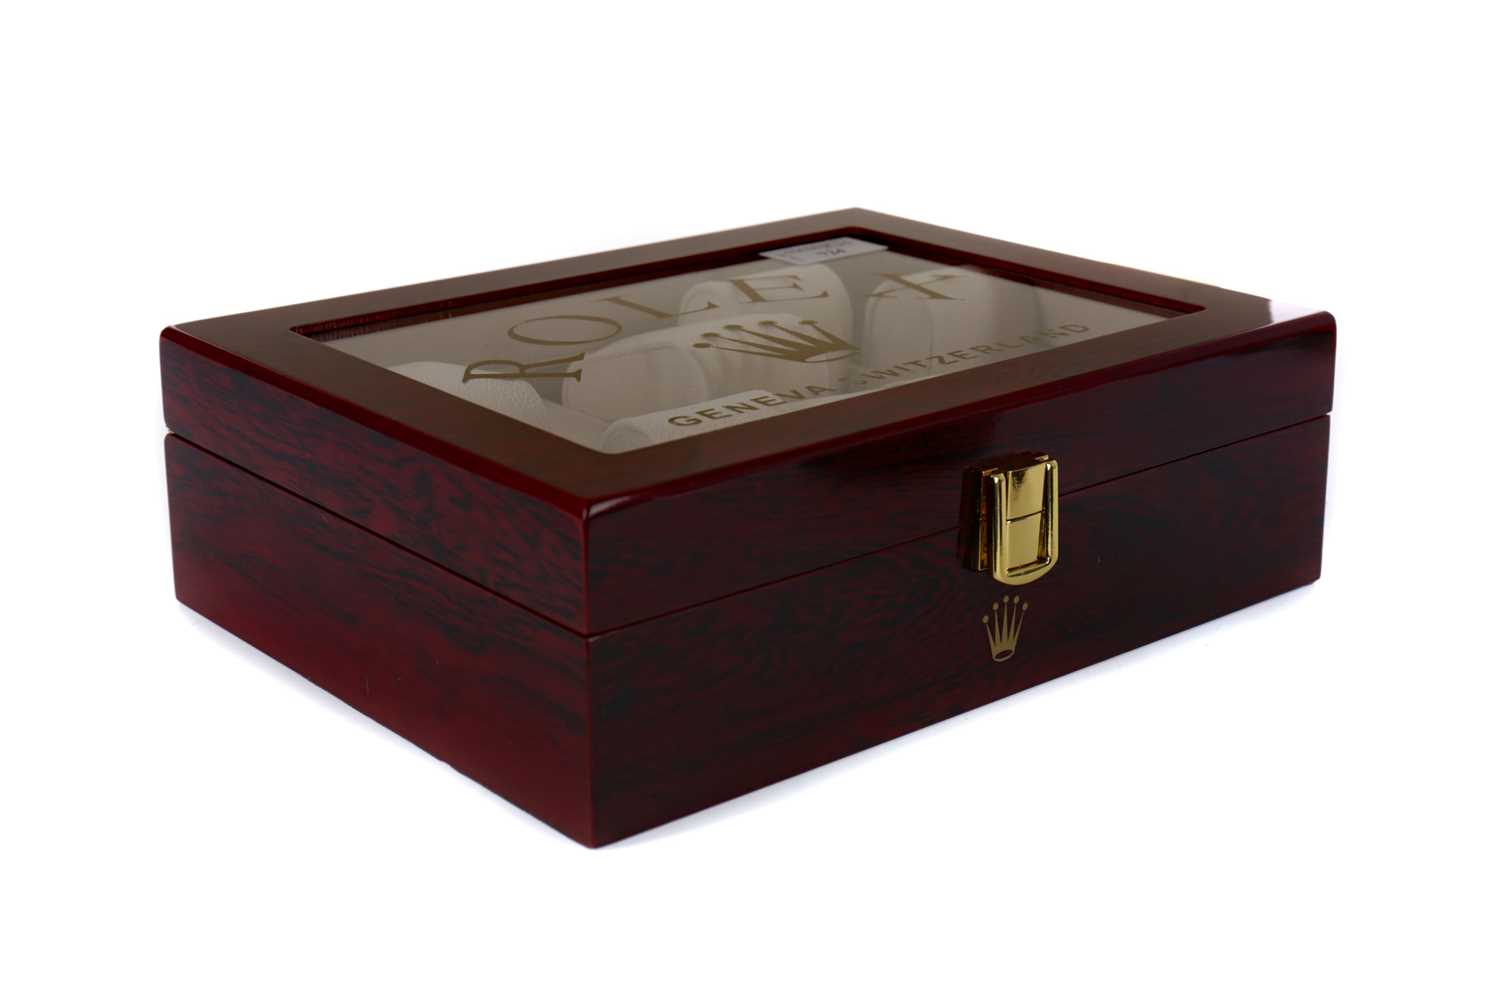 Lot 724 - A WOODEN WATCH DISPLAY BOX